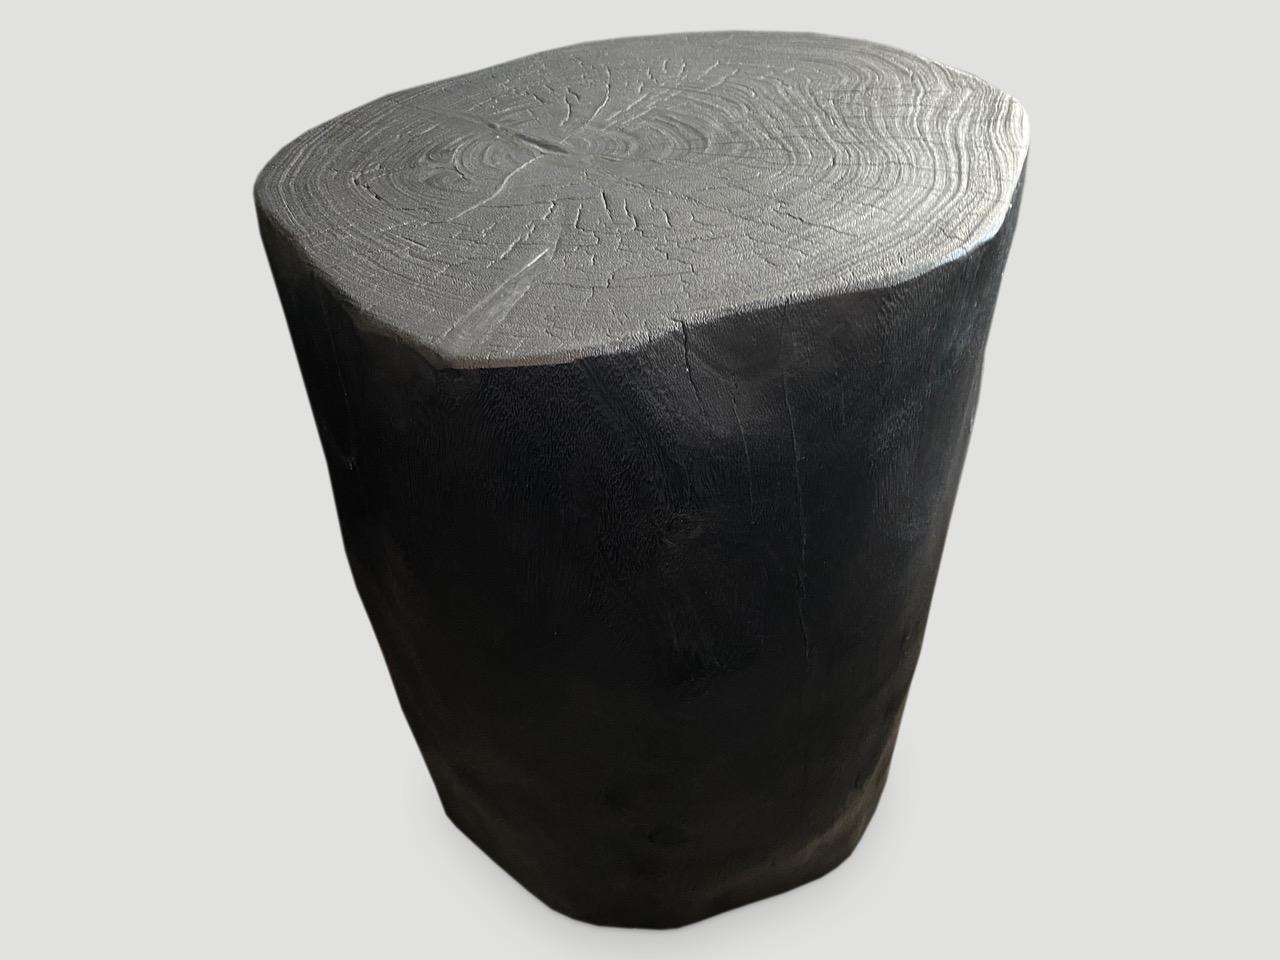 Minimalist hand carved reclaimed suar wood side table. Burnt, sanded and sealed whilst respecting the natural organic shape. We have a collection. The price and size reflect the one shown. All unique.

The Triple Burnt Collection represents a